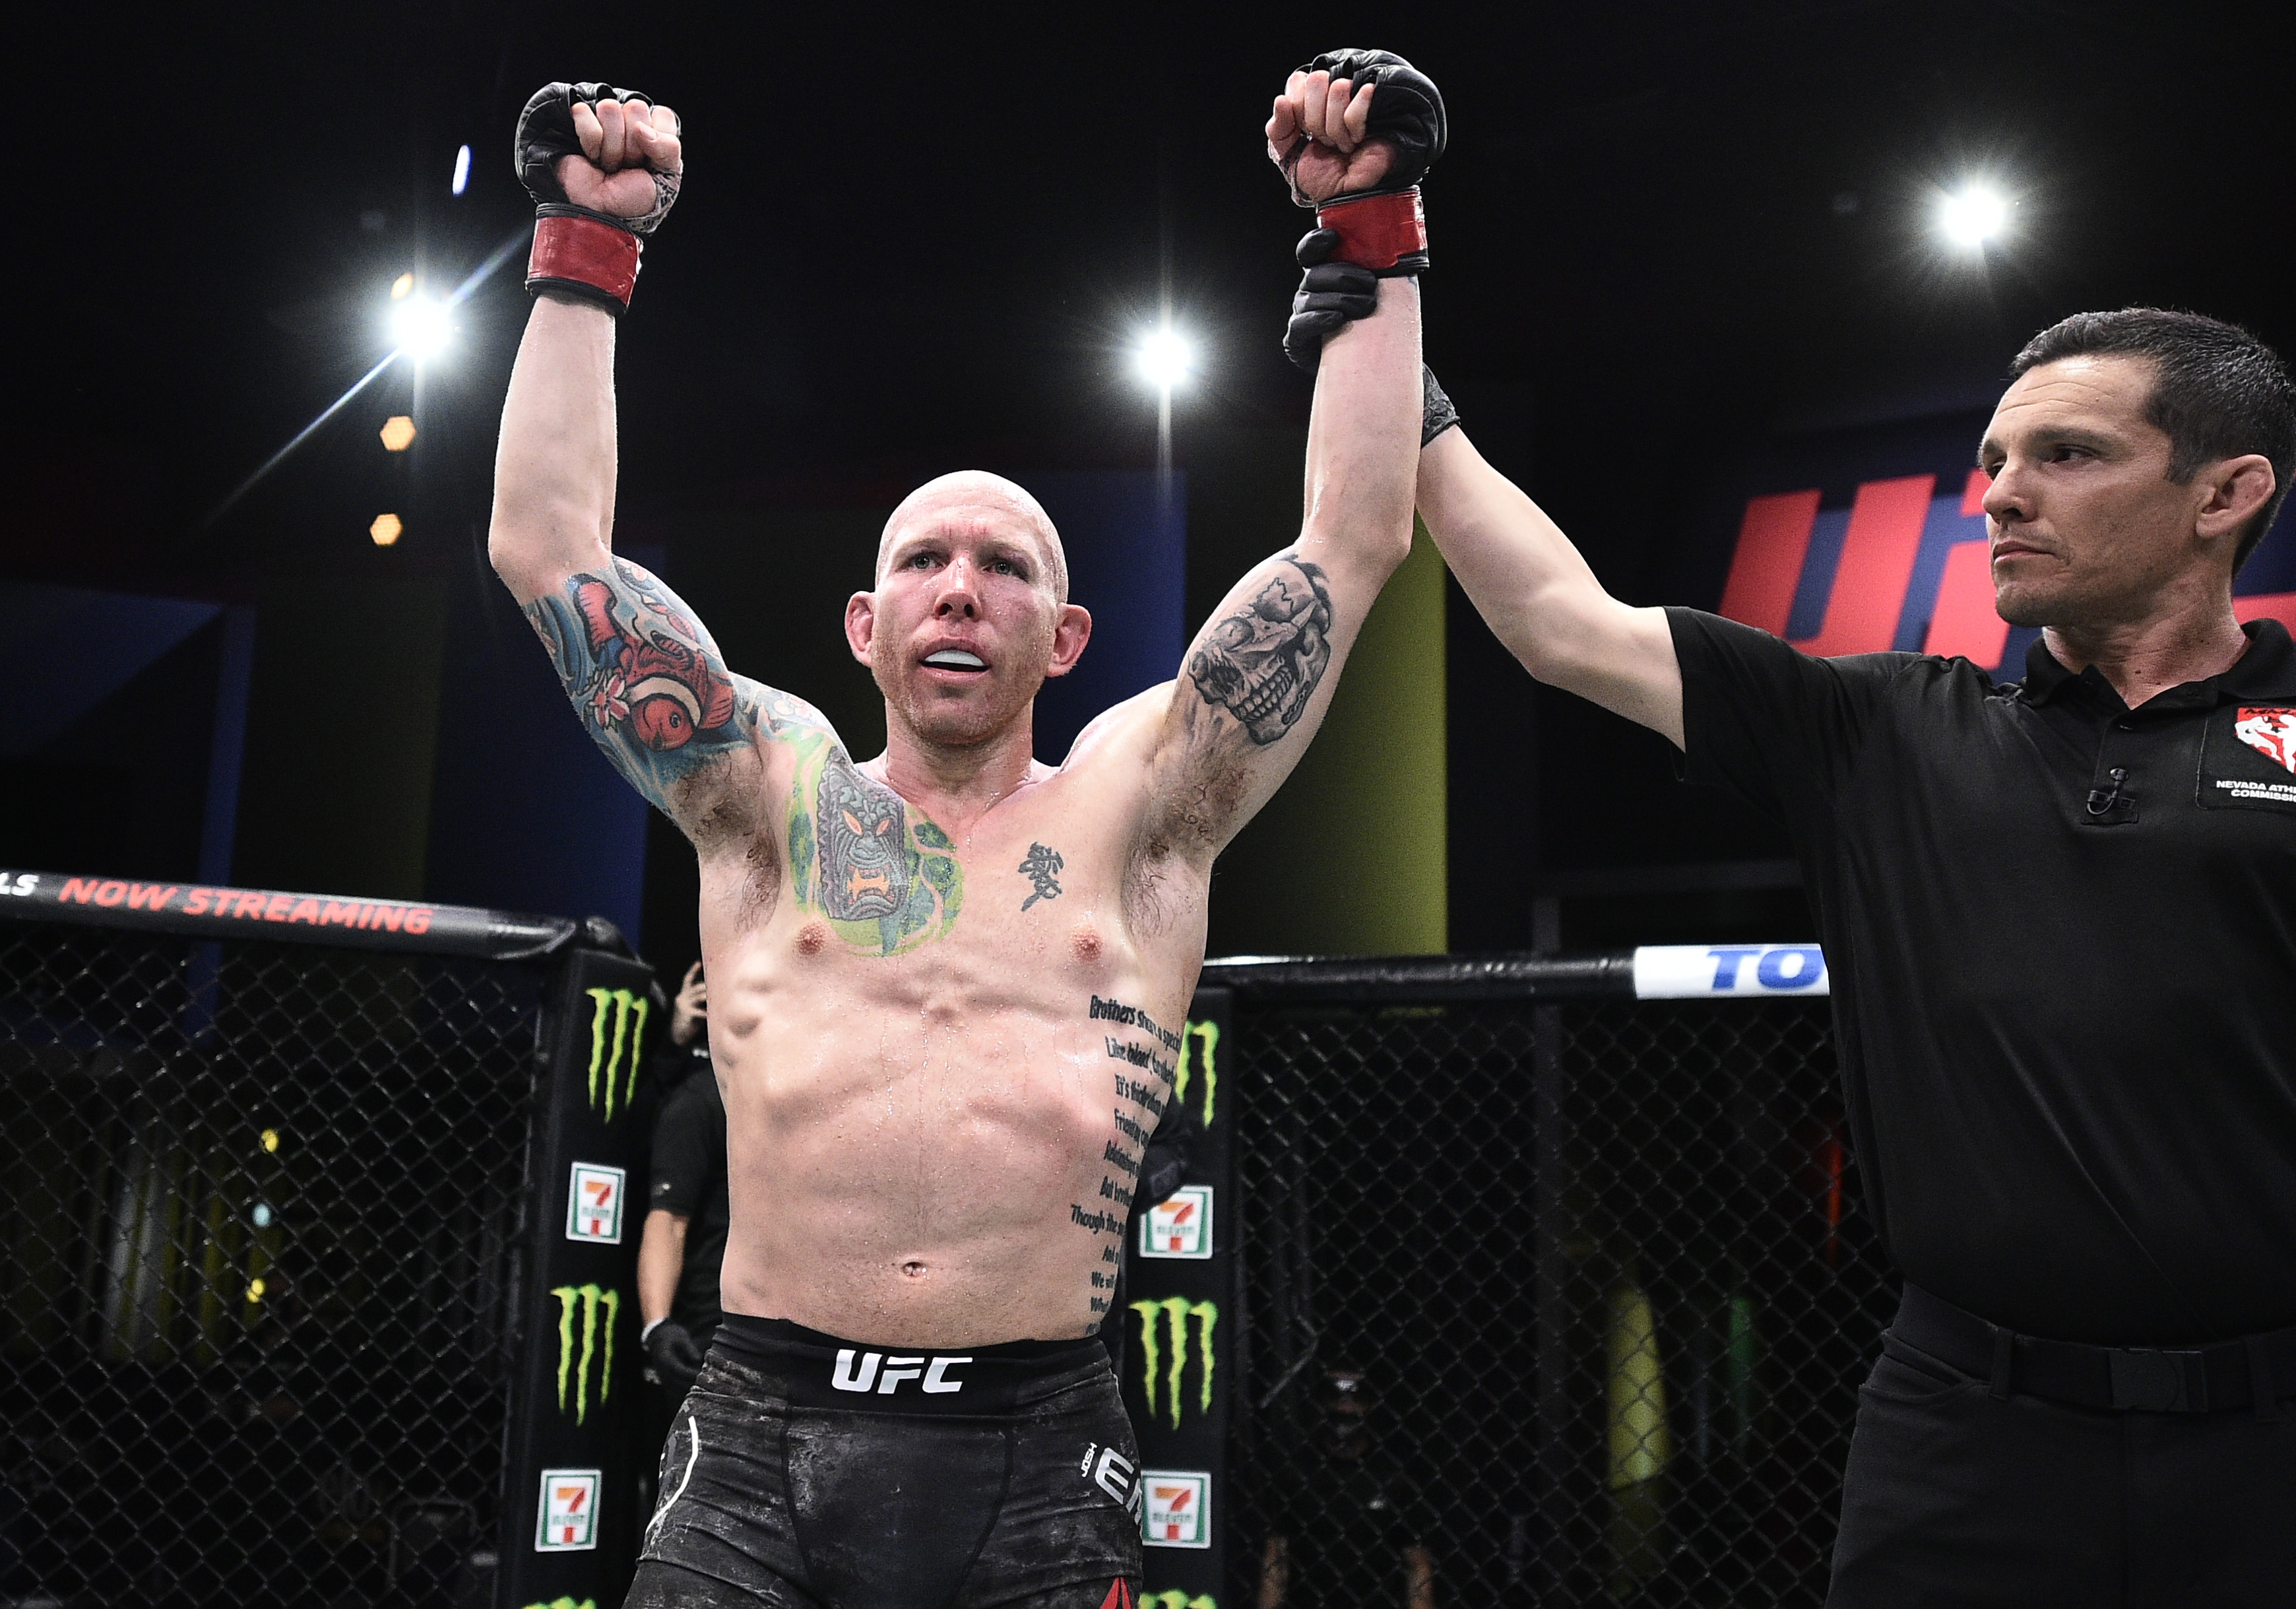 Josh Emmett just proved UFC fighters are a different breed of athlete by admitting he tore his ACL in his recent UFC victory.